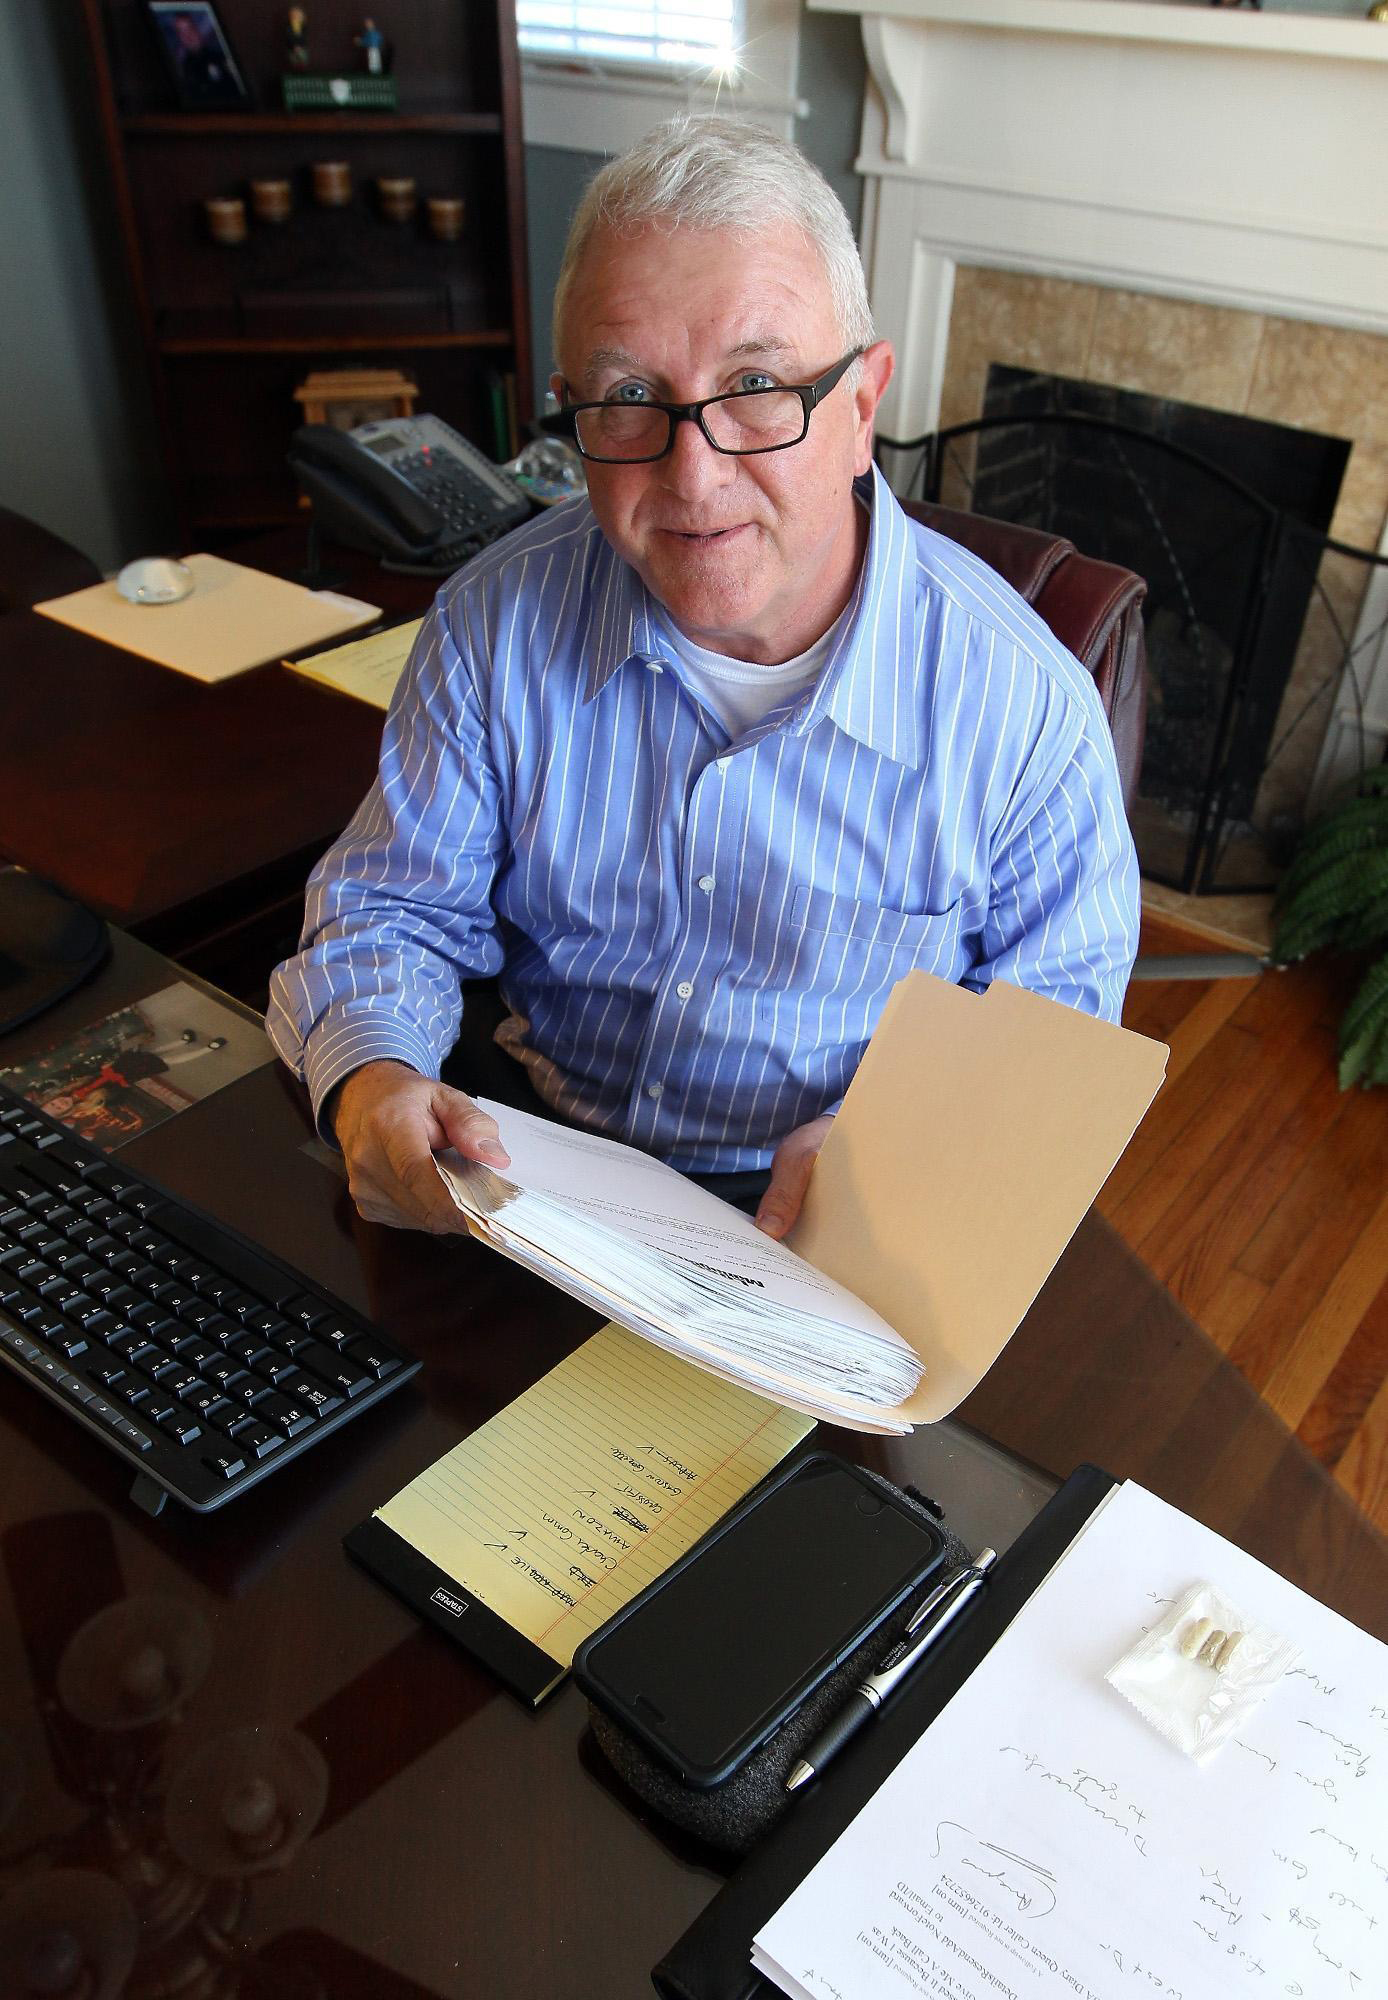 PHOTO: This 2017 photo shows Roger Self in his office at Southeastern Loss Management, in Dallas, N.C.